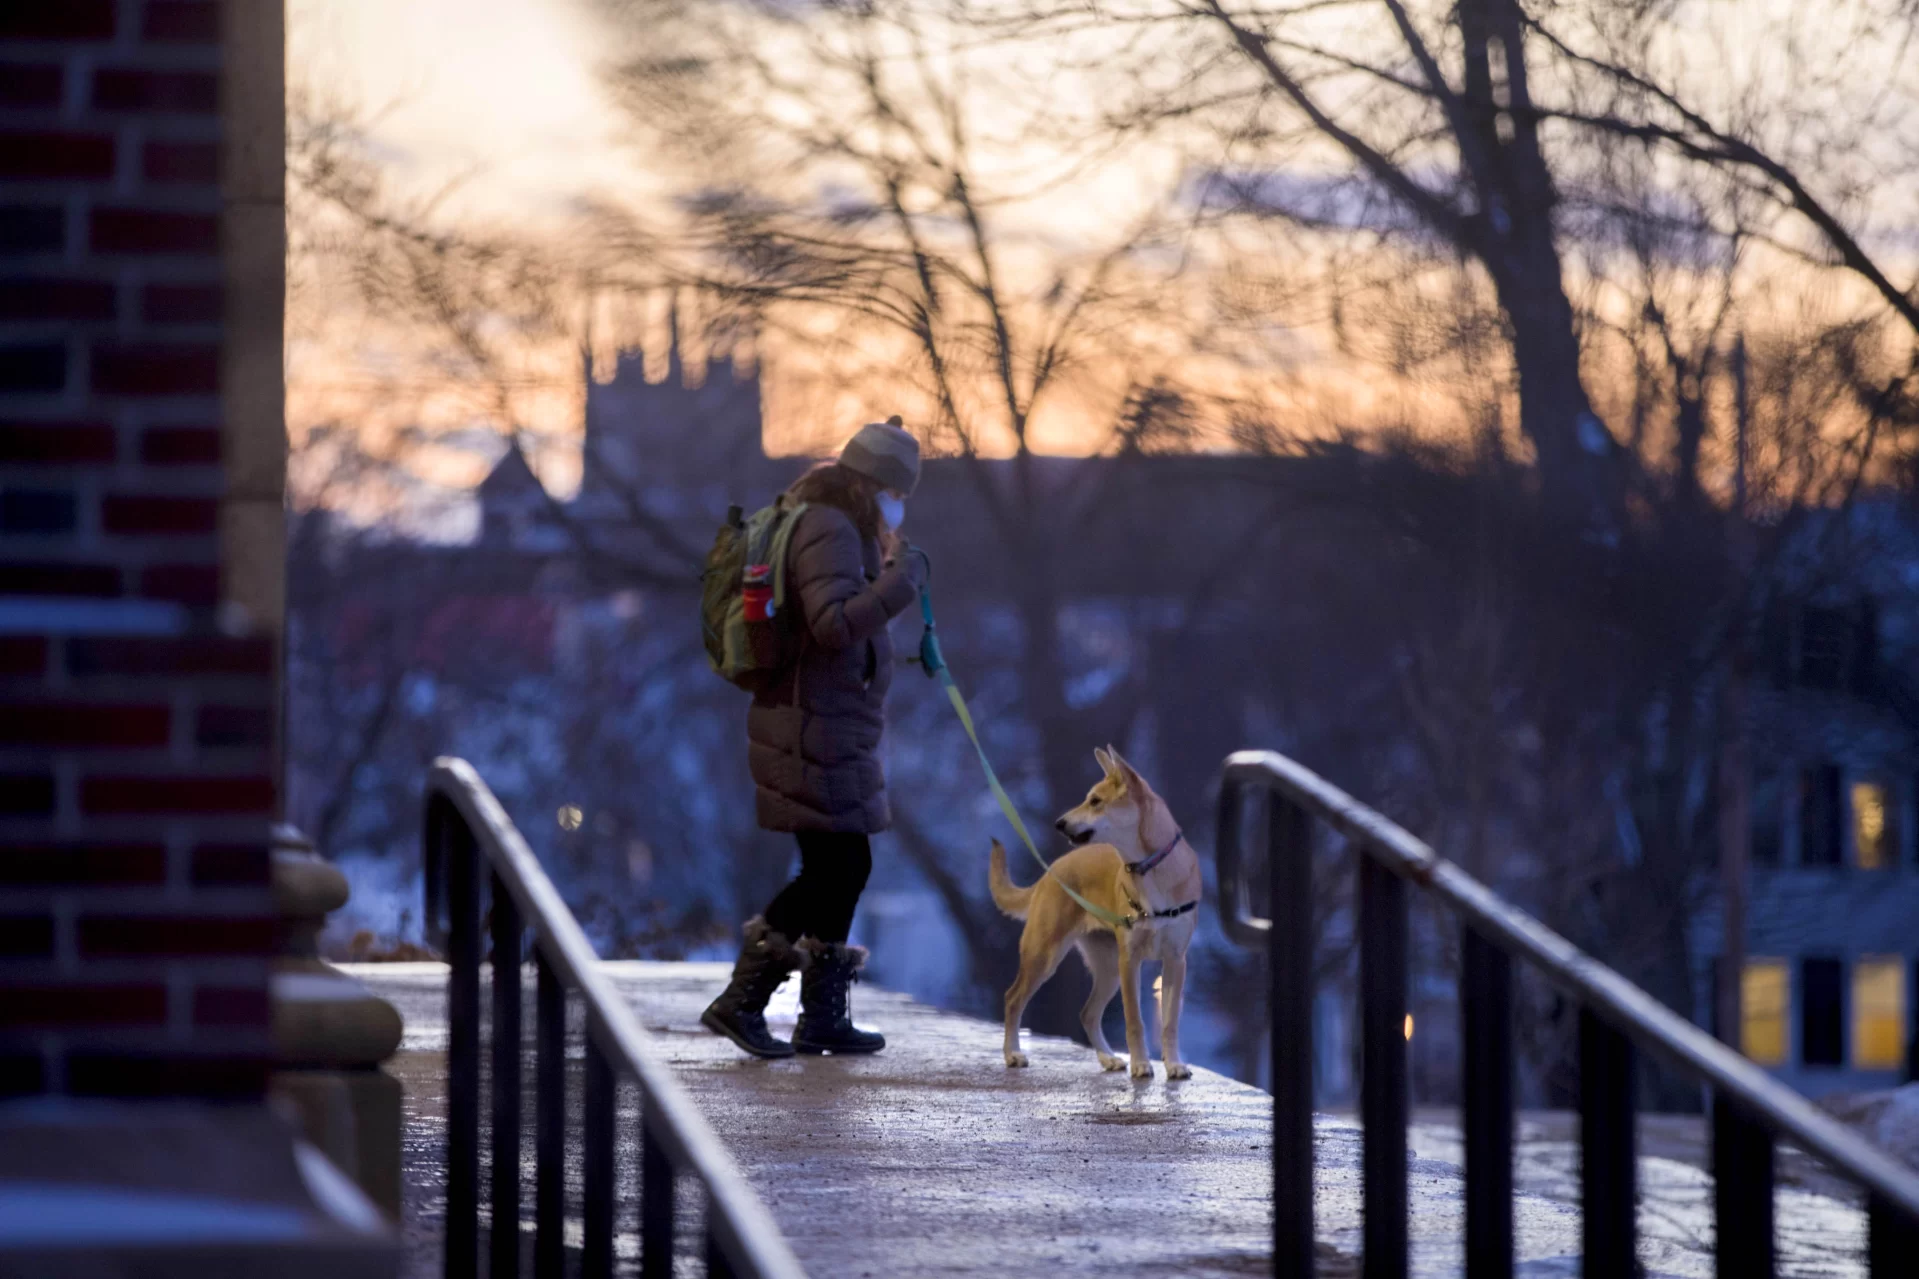 Campus at dusk on Monday, Jan. 10, 2022.

Dog walking on the Coram Library stage.